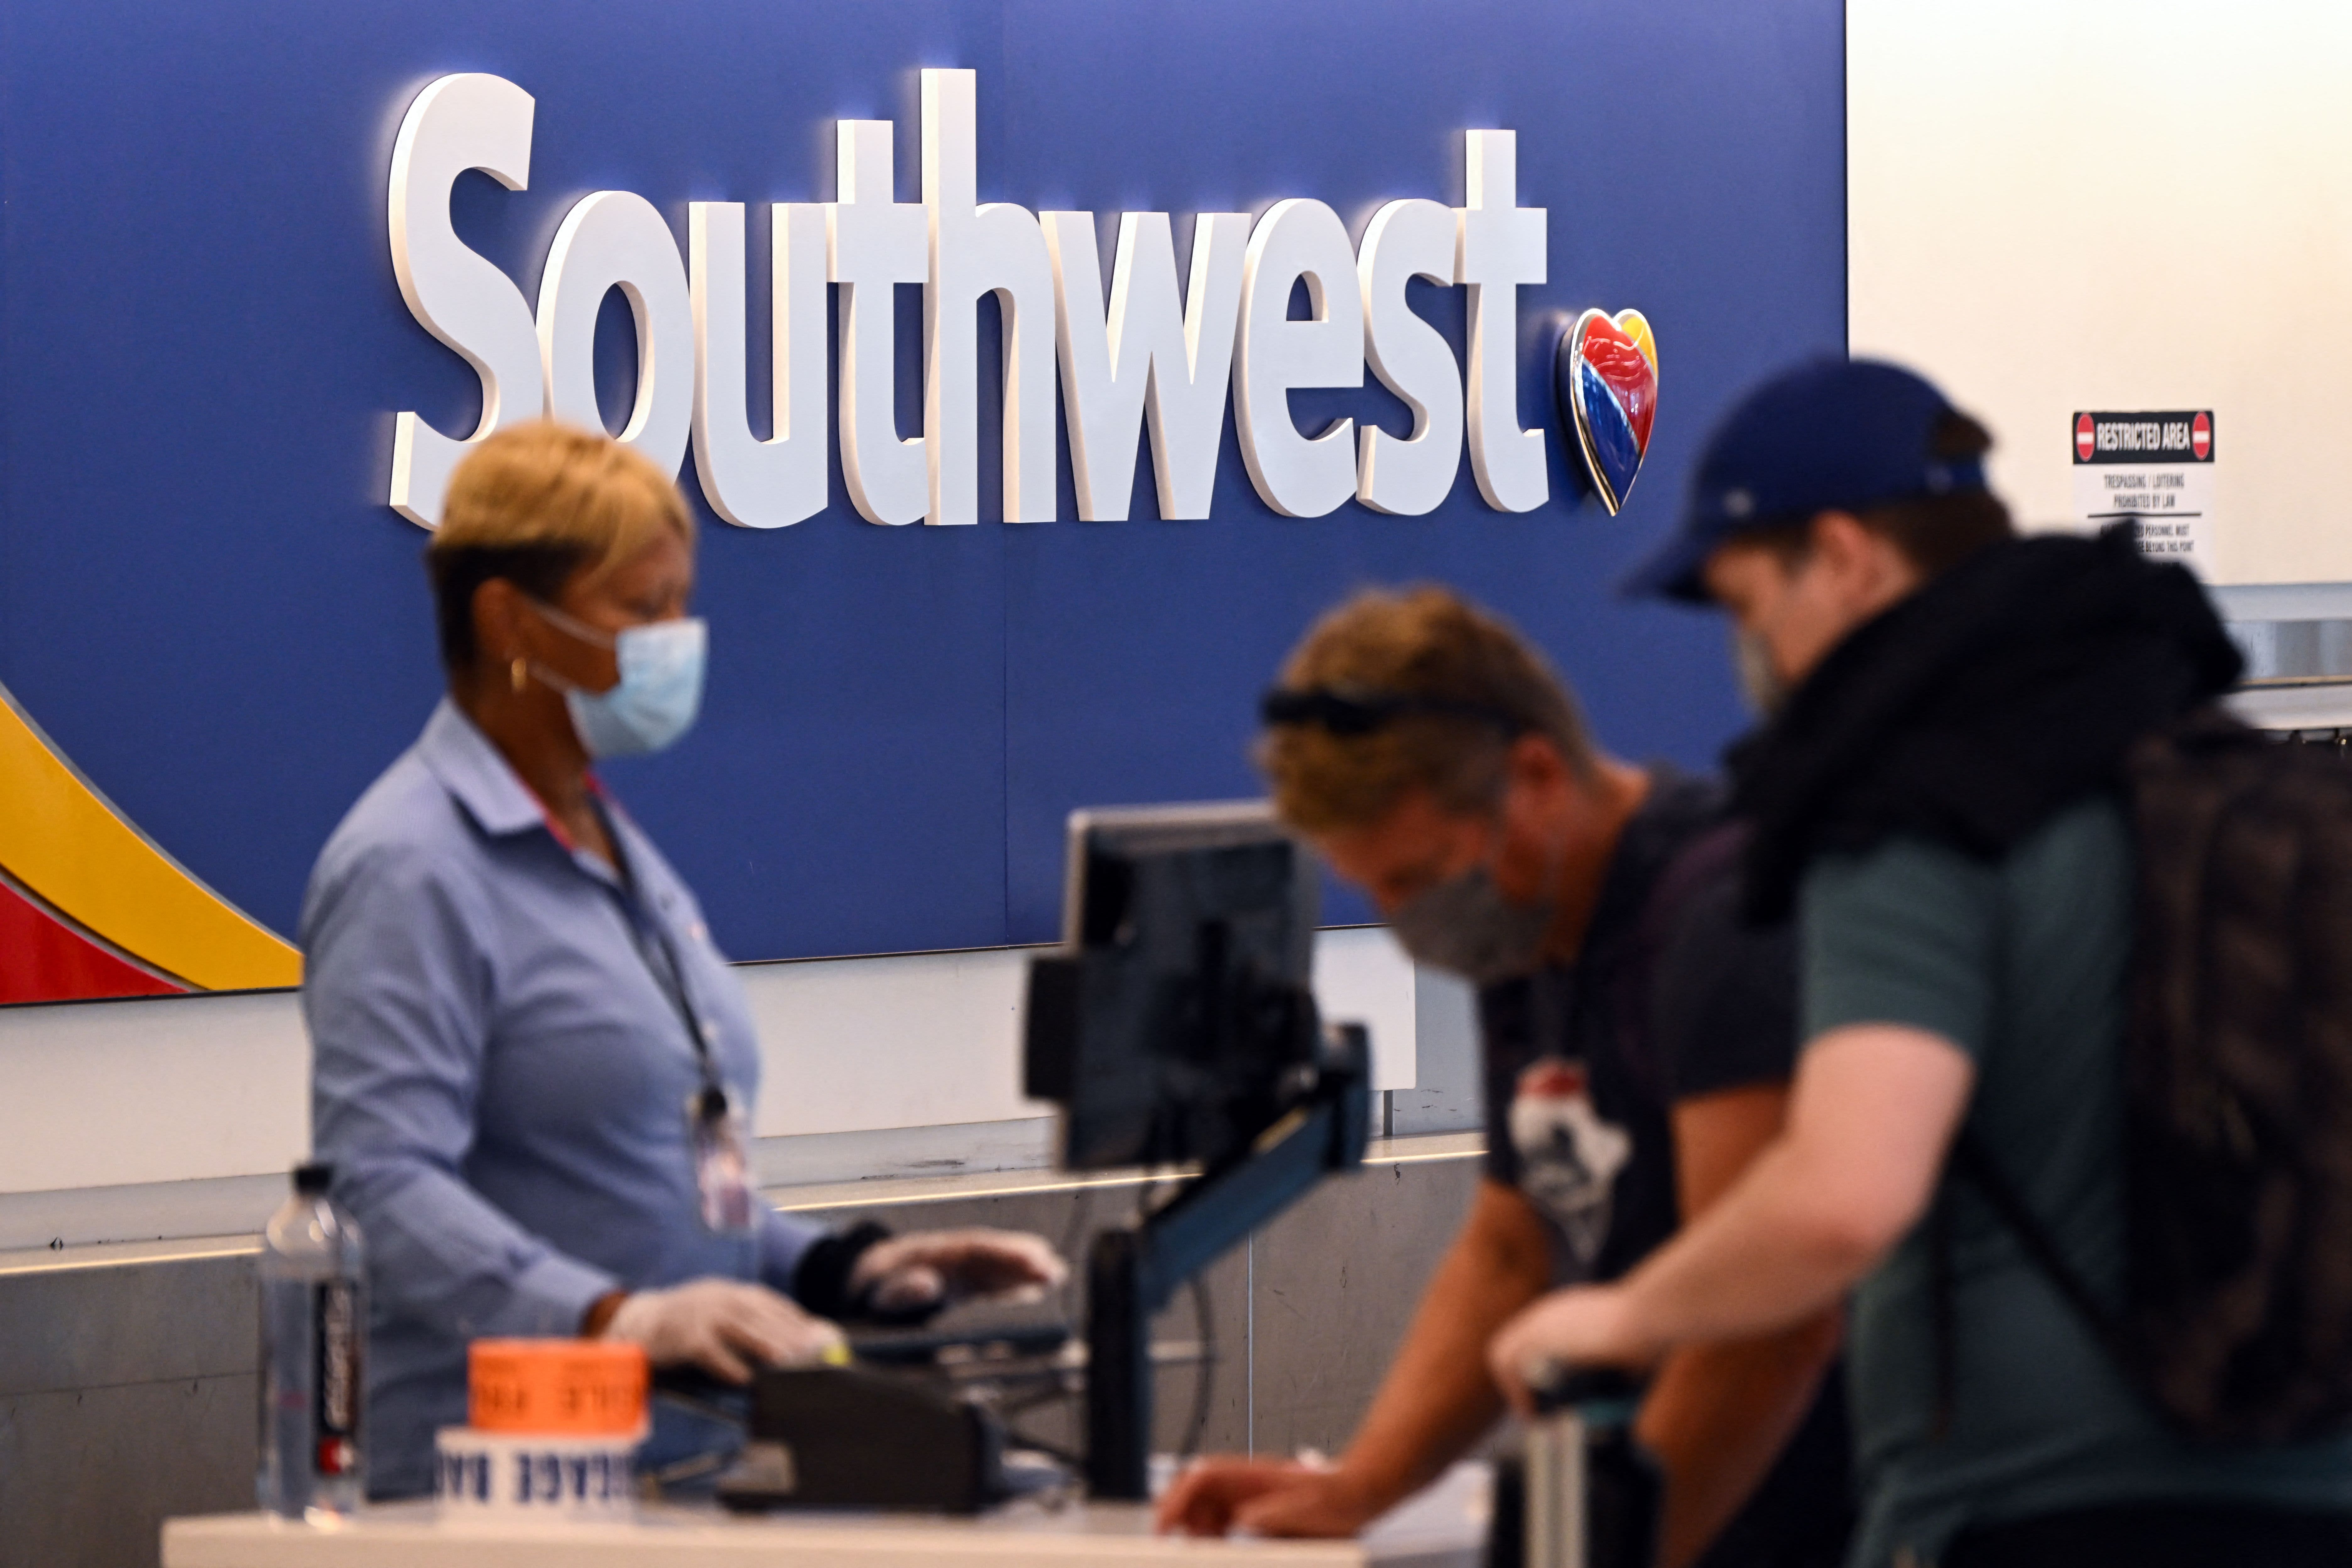 CFRA says Southwest Airlines remains a strong buy, despite recent turmoil for travelers